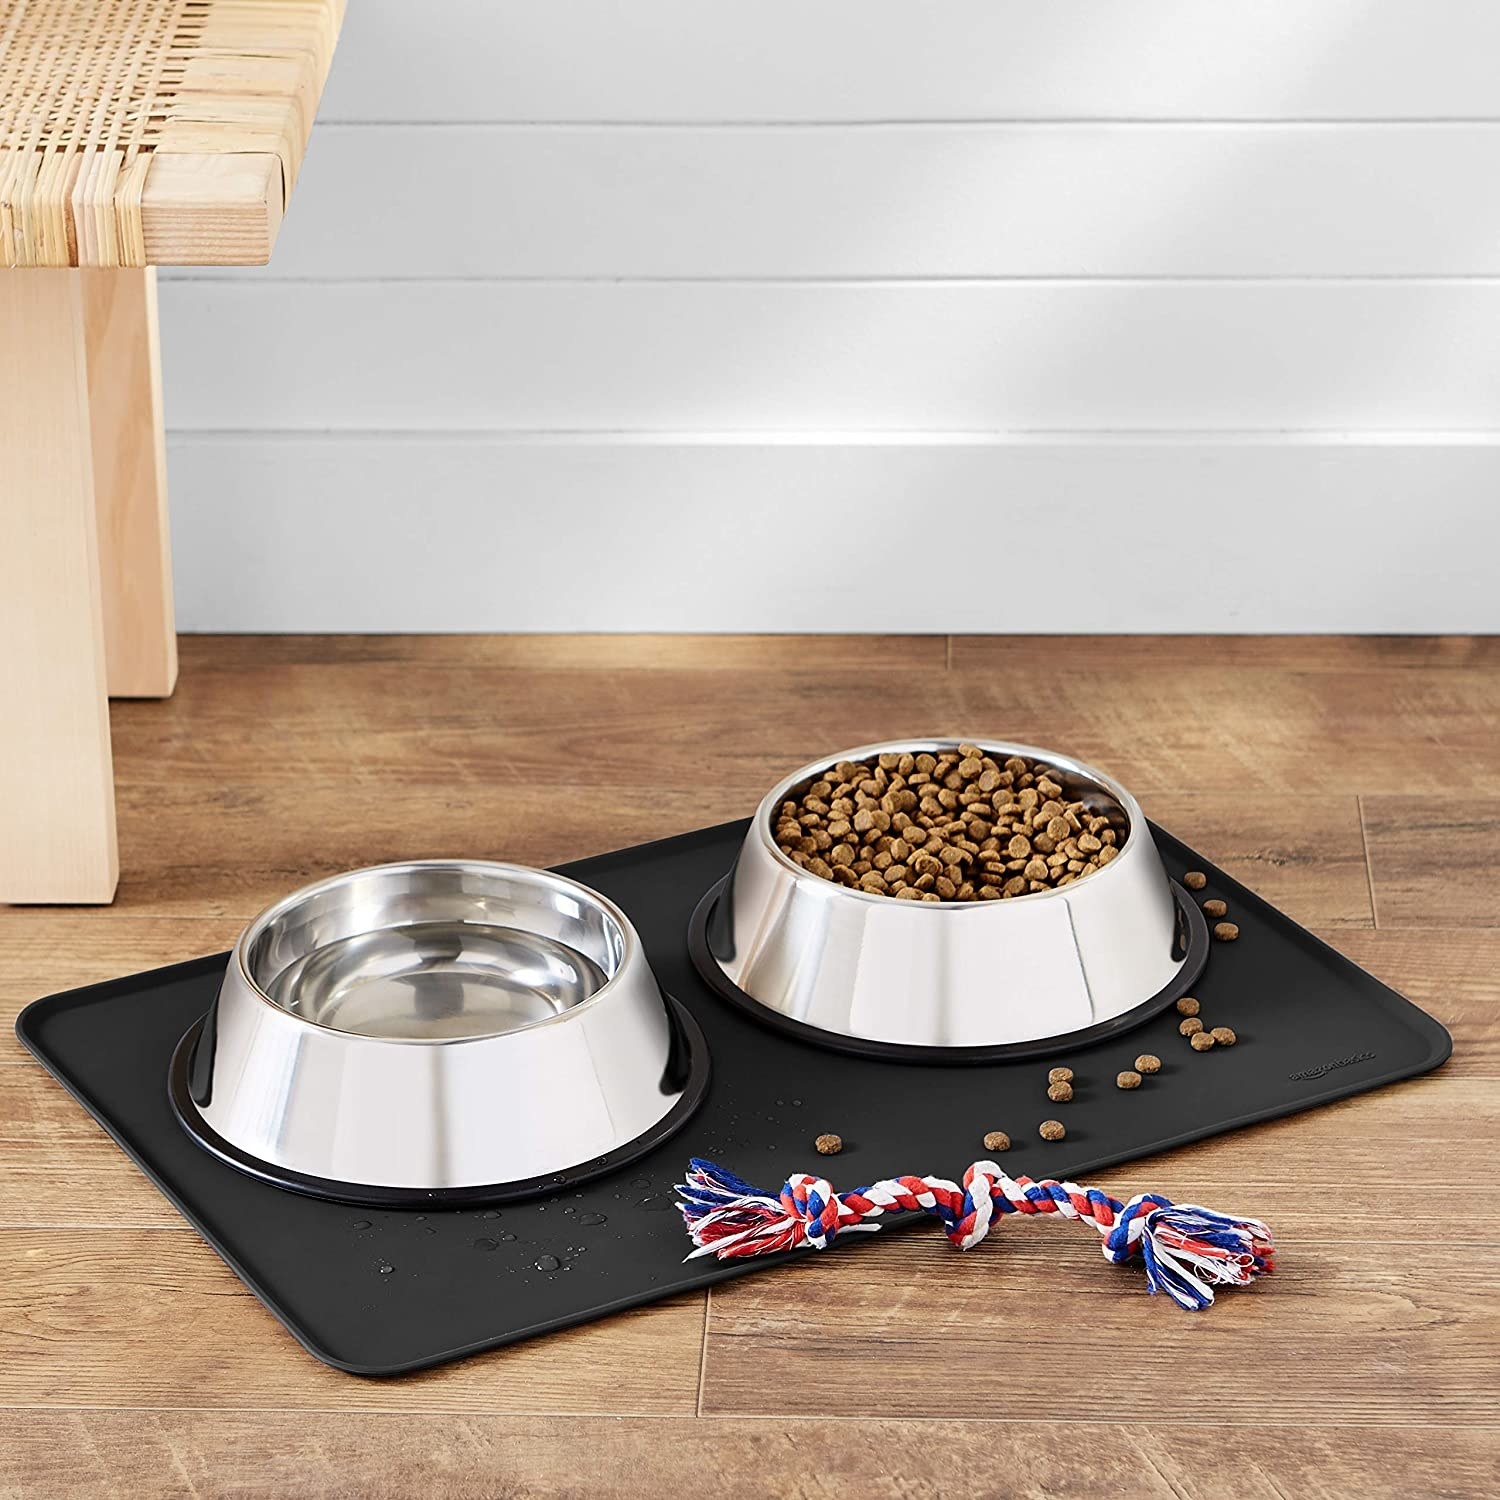 Two dog bowls placed on anti-slip mat